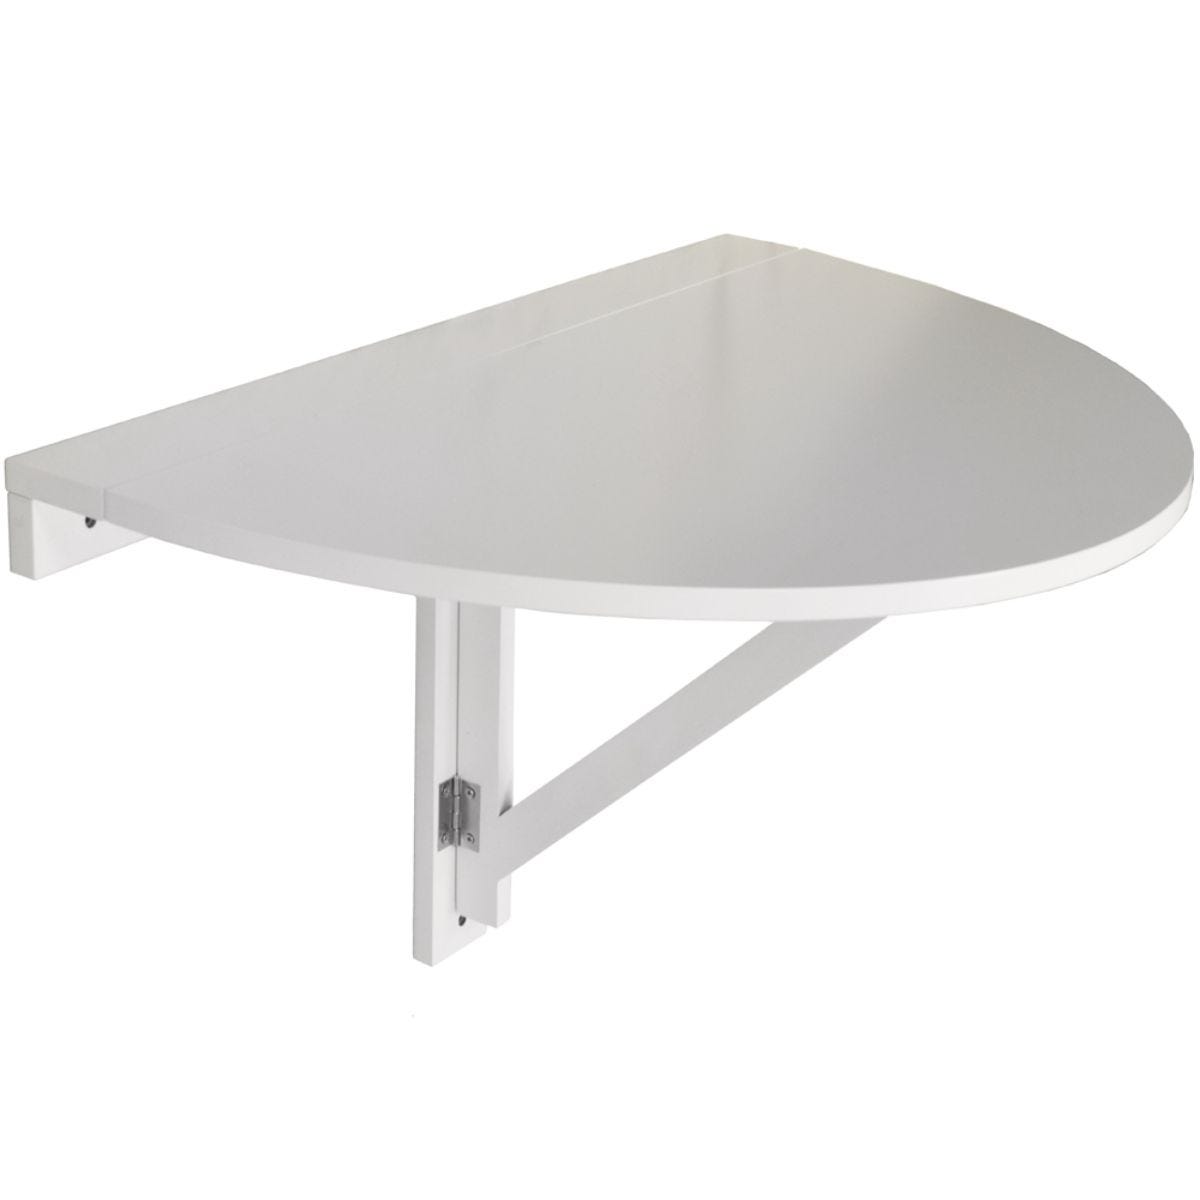 Techstyle Hideaway Folding / Fold Down Drop-leaf Wall Mounted Semi Circular Dining Table White